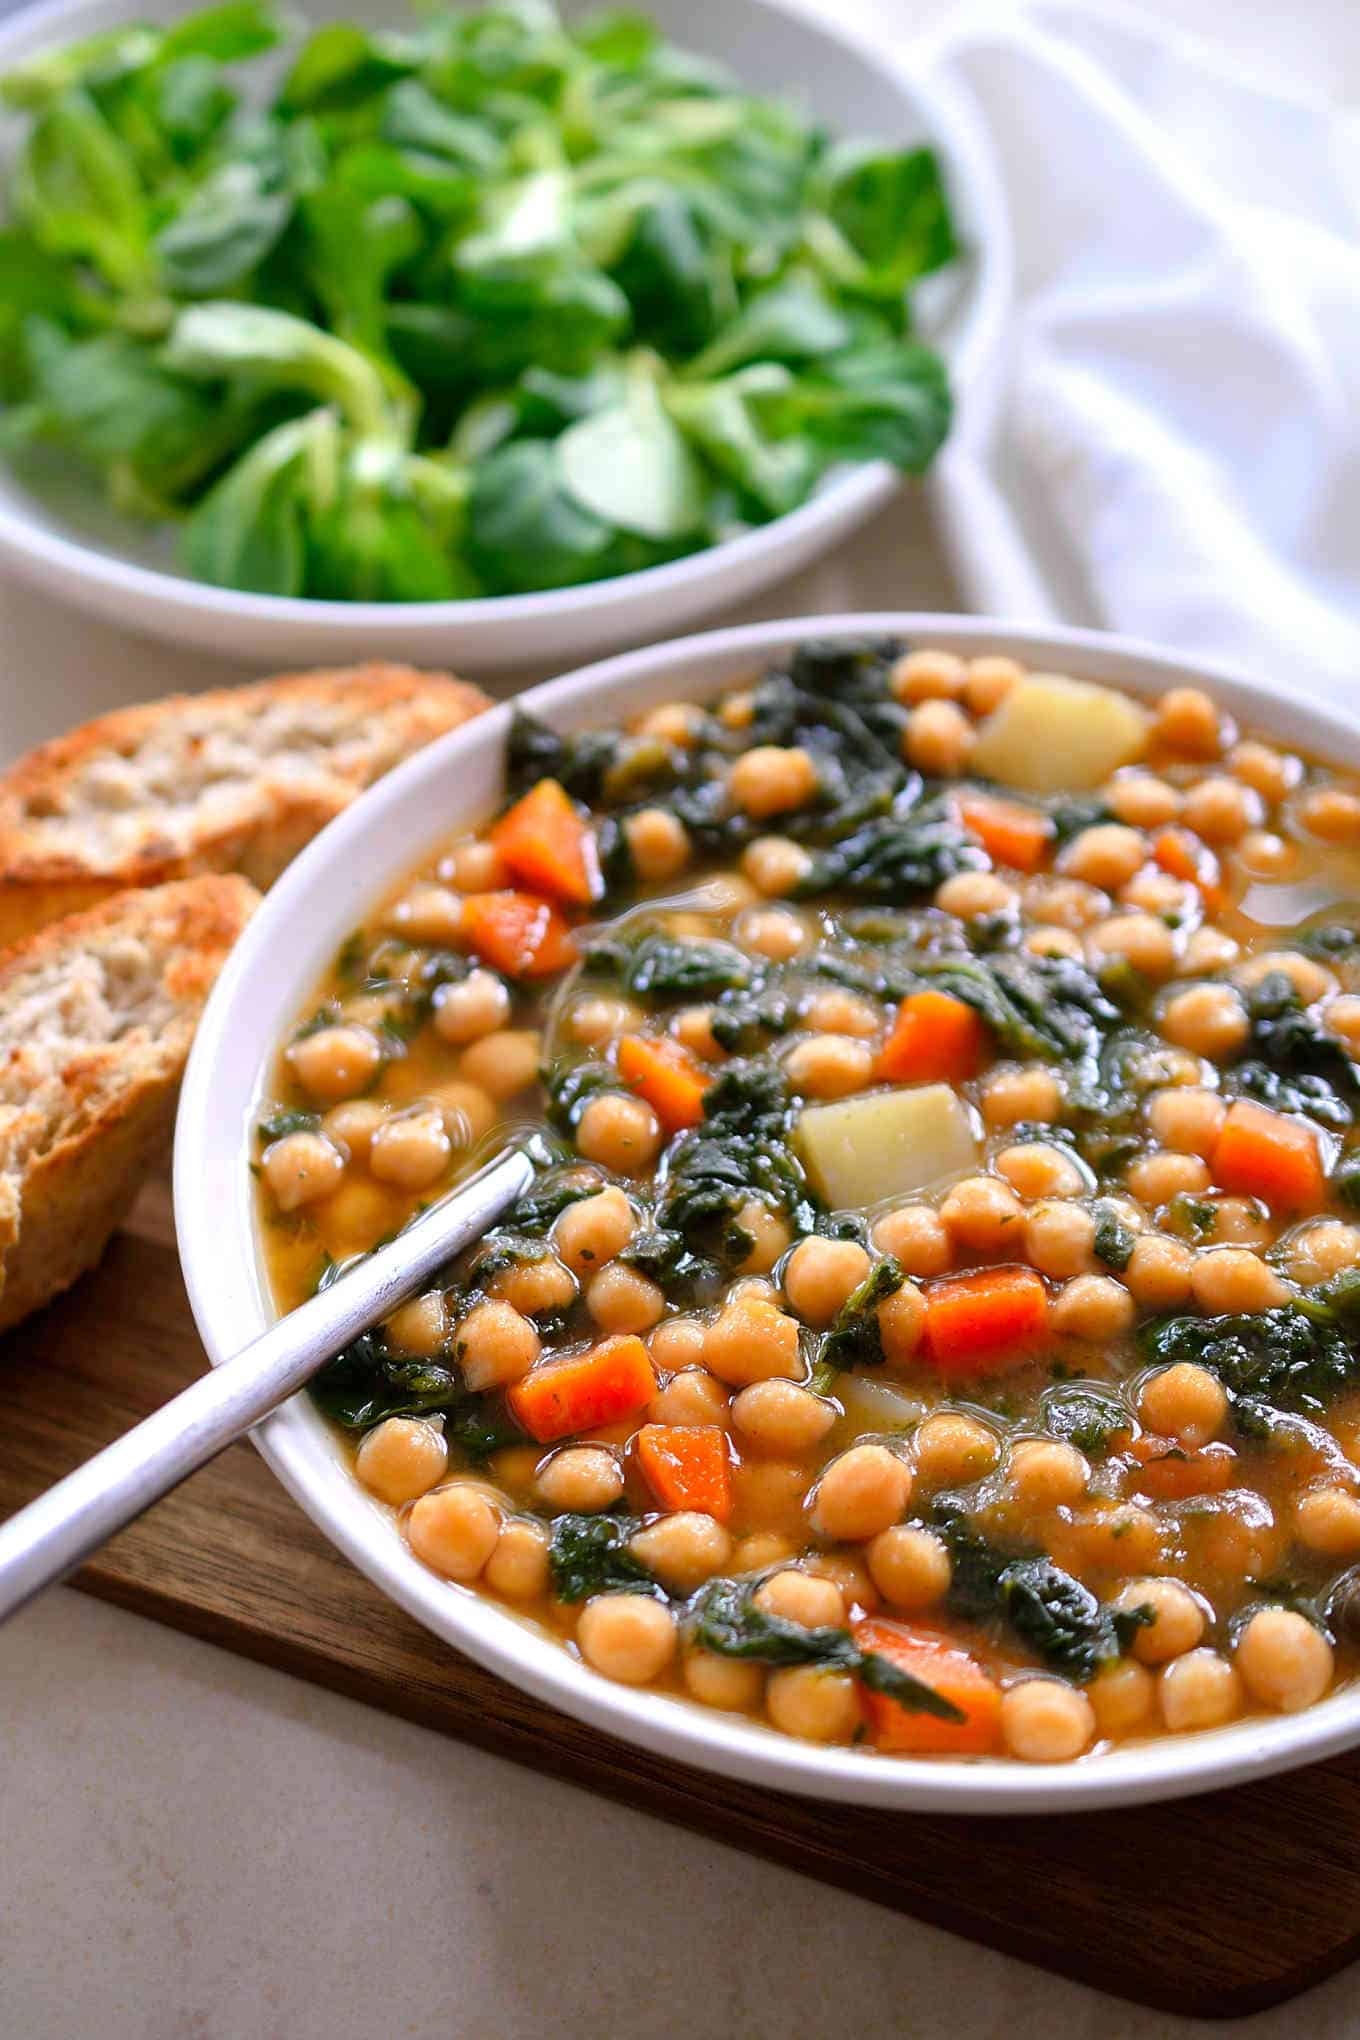 This Spanish chickpea stew can be made with canned chickpeas for a quick 20-minute meal or dried chickpeas for a dirt cheap dinner.